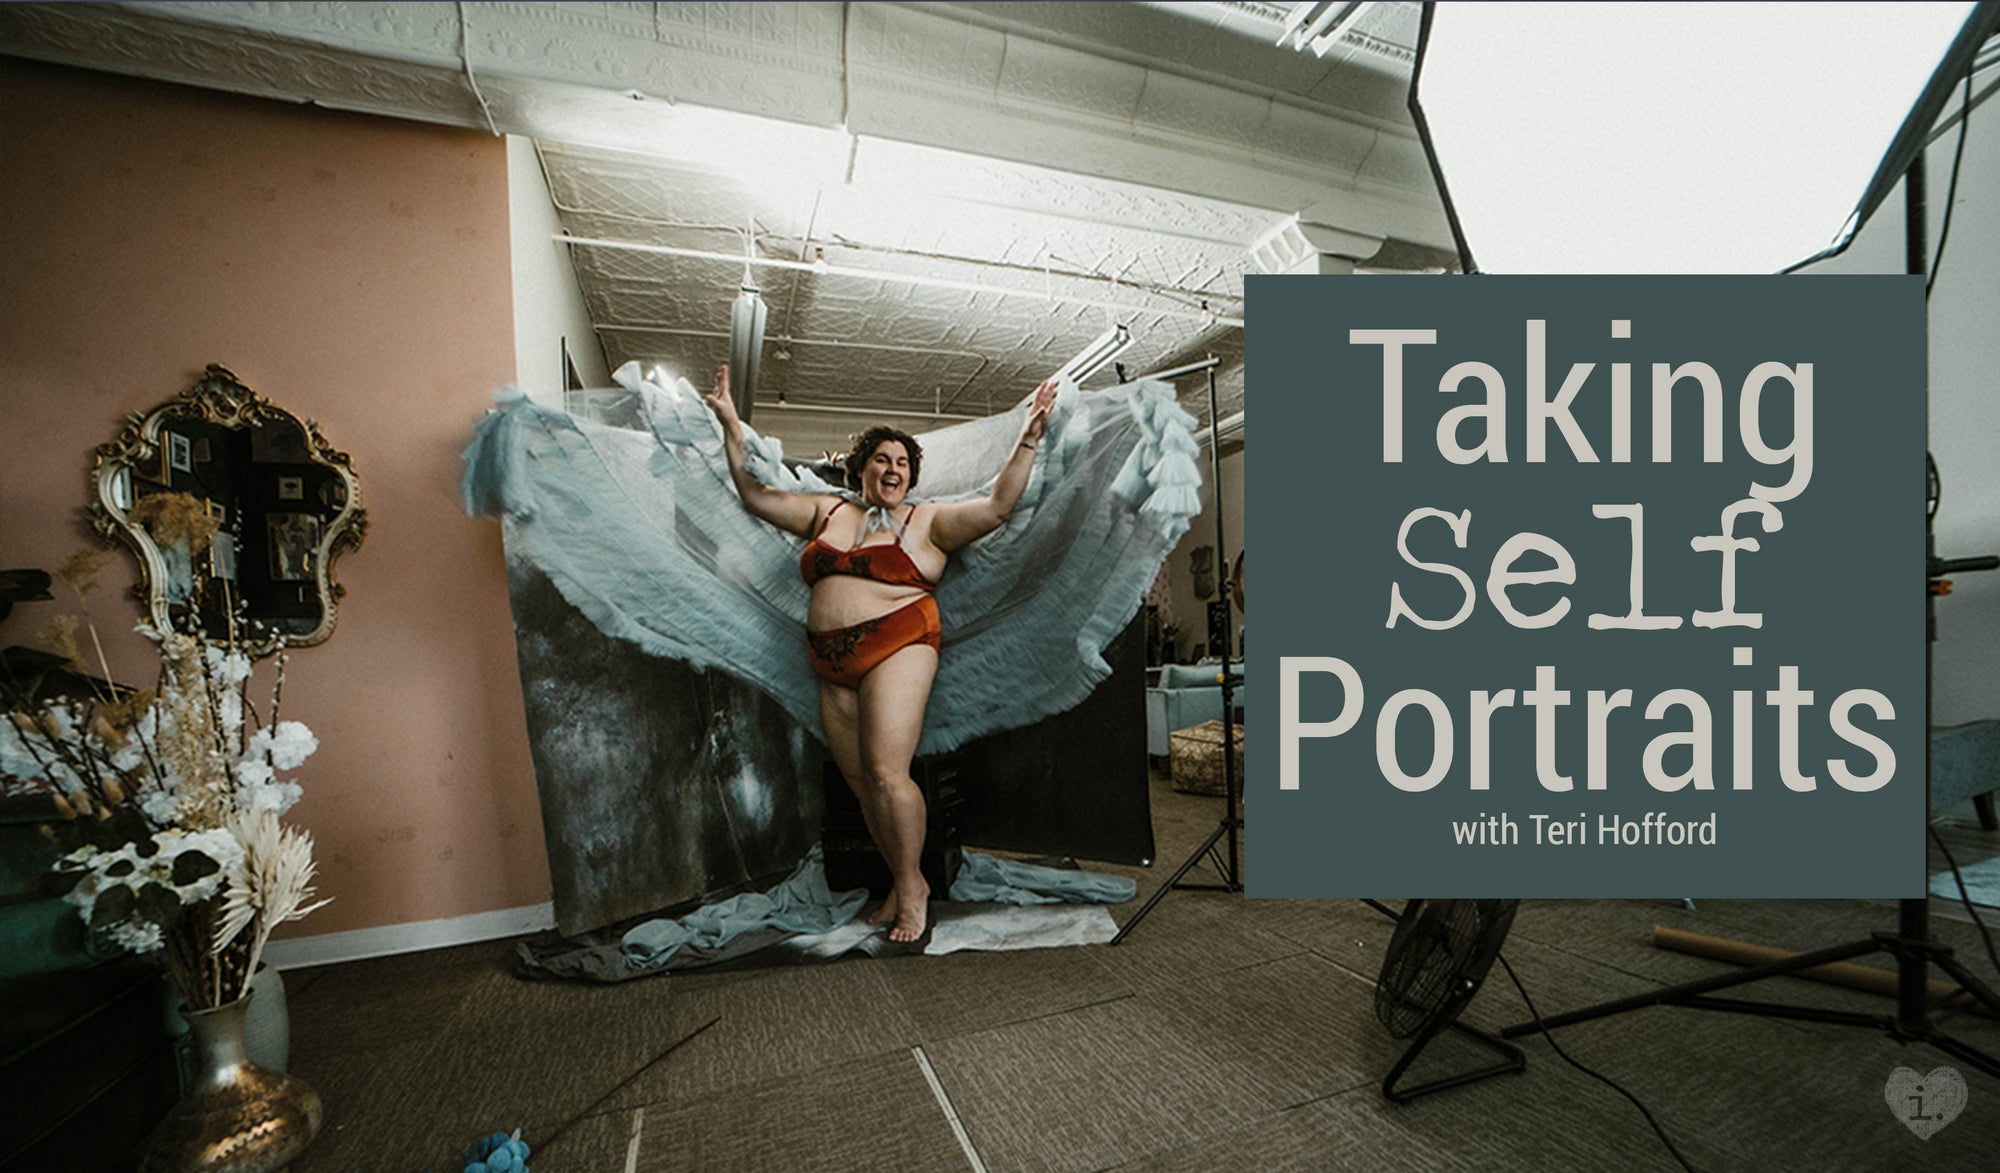 Taking Self Portraits with Teri Hofford